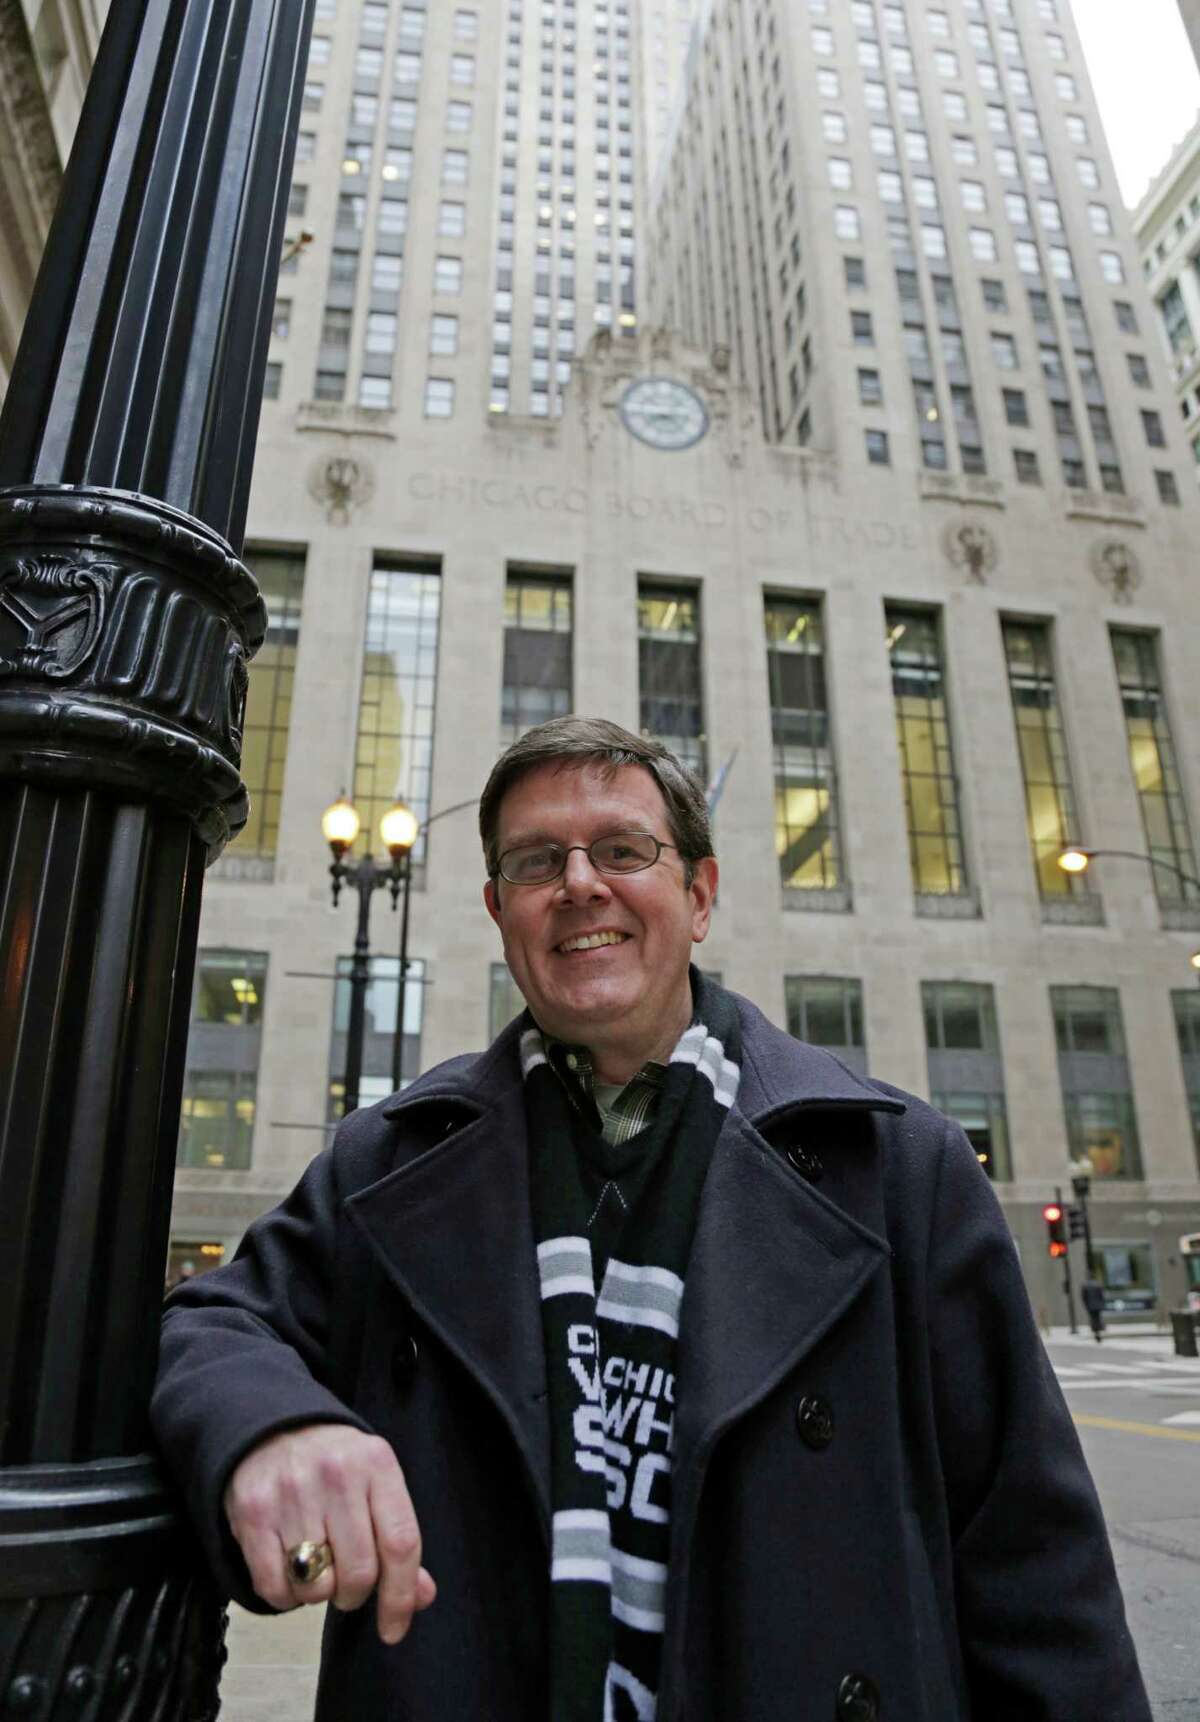 Sean Toohey, a grains broker at the Chicago Board of Trade, who had hip replacement surgery last summer, poses for a photo Monday, Feb. 11, 2013, in Chicago. Routine hip replacement surgery on a healthy patient may cost as little as $11,000 _ or up to nearly $126,000. Toohey said he has good health insurance that covered most of the costs, and it didn't occur to him to ask about price beforehand. (AP Photo/M. Spencer Green)